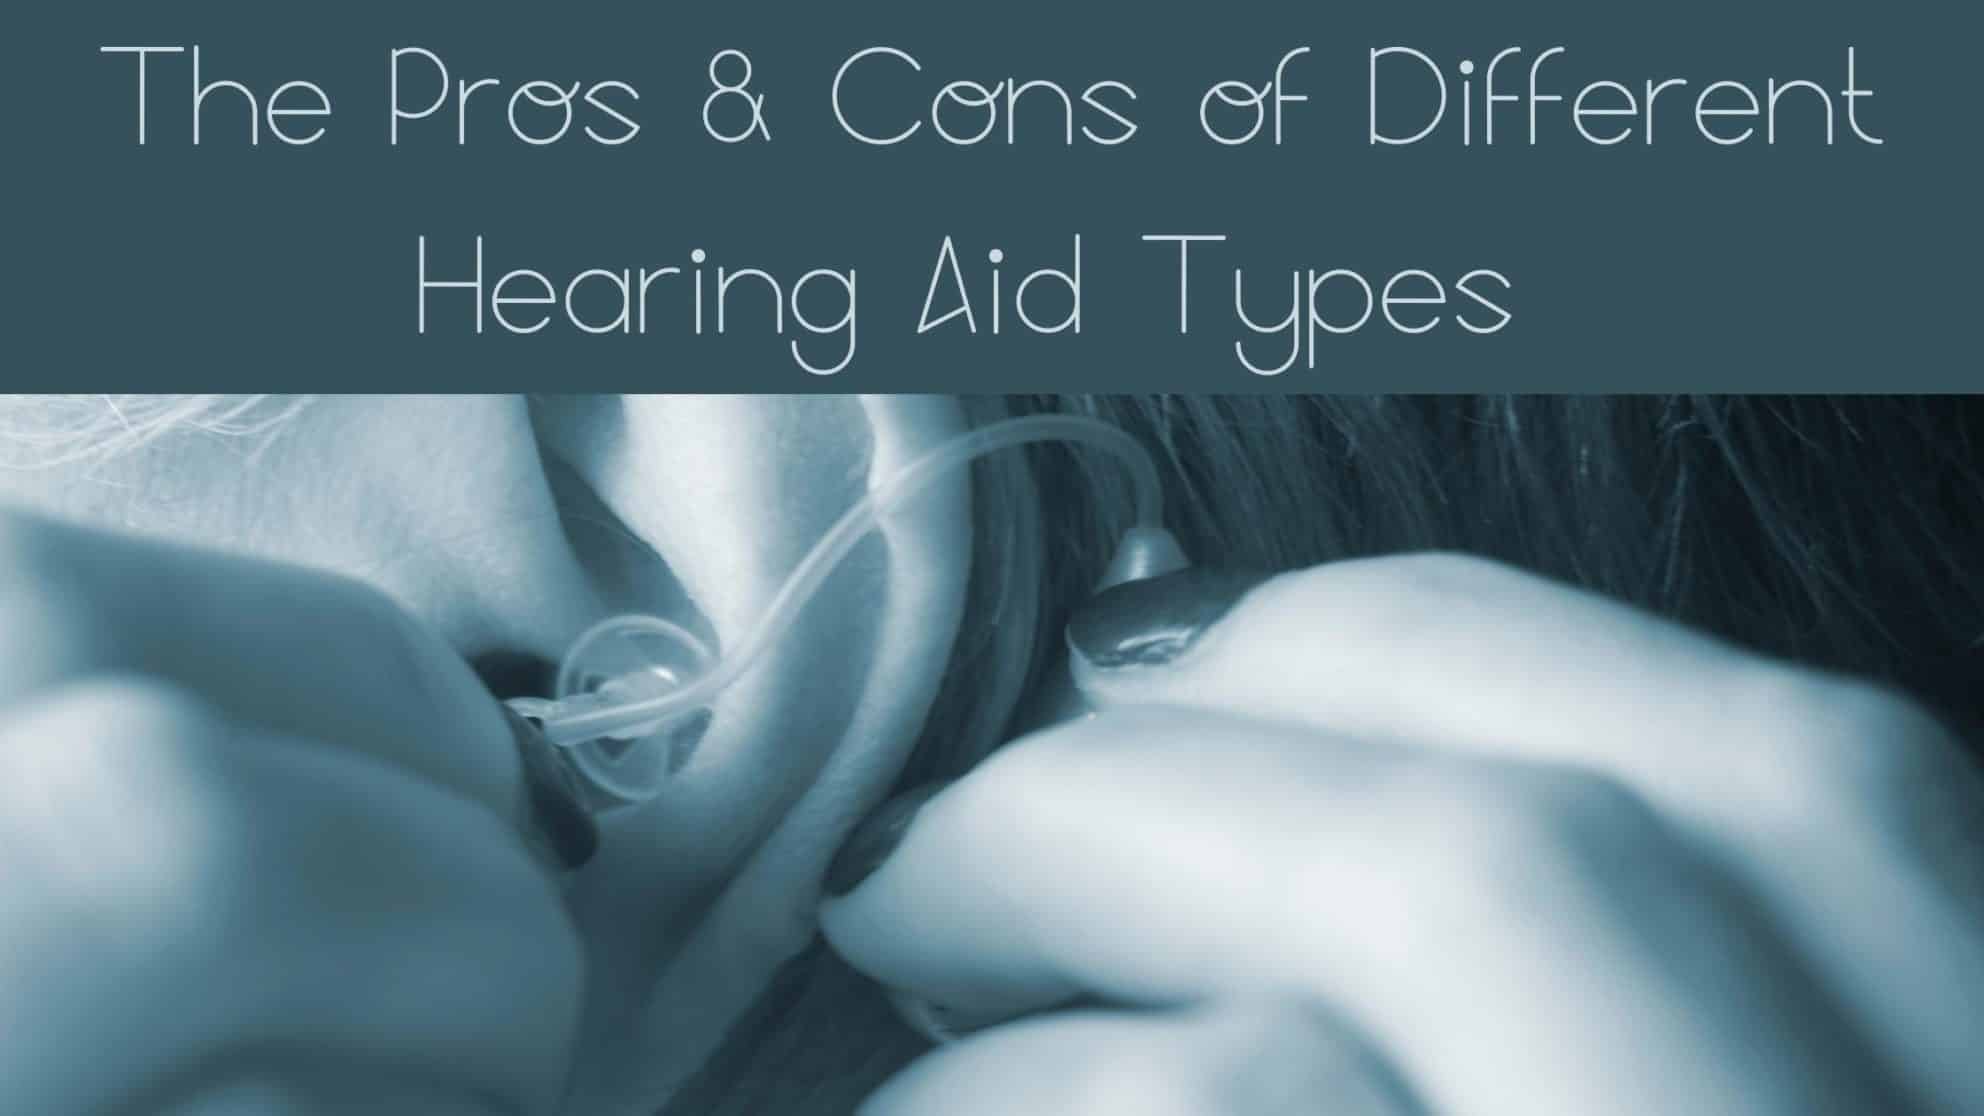 The Pros & Cons of Different Hearing Aid Types